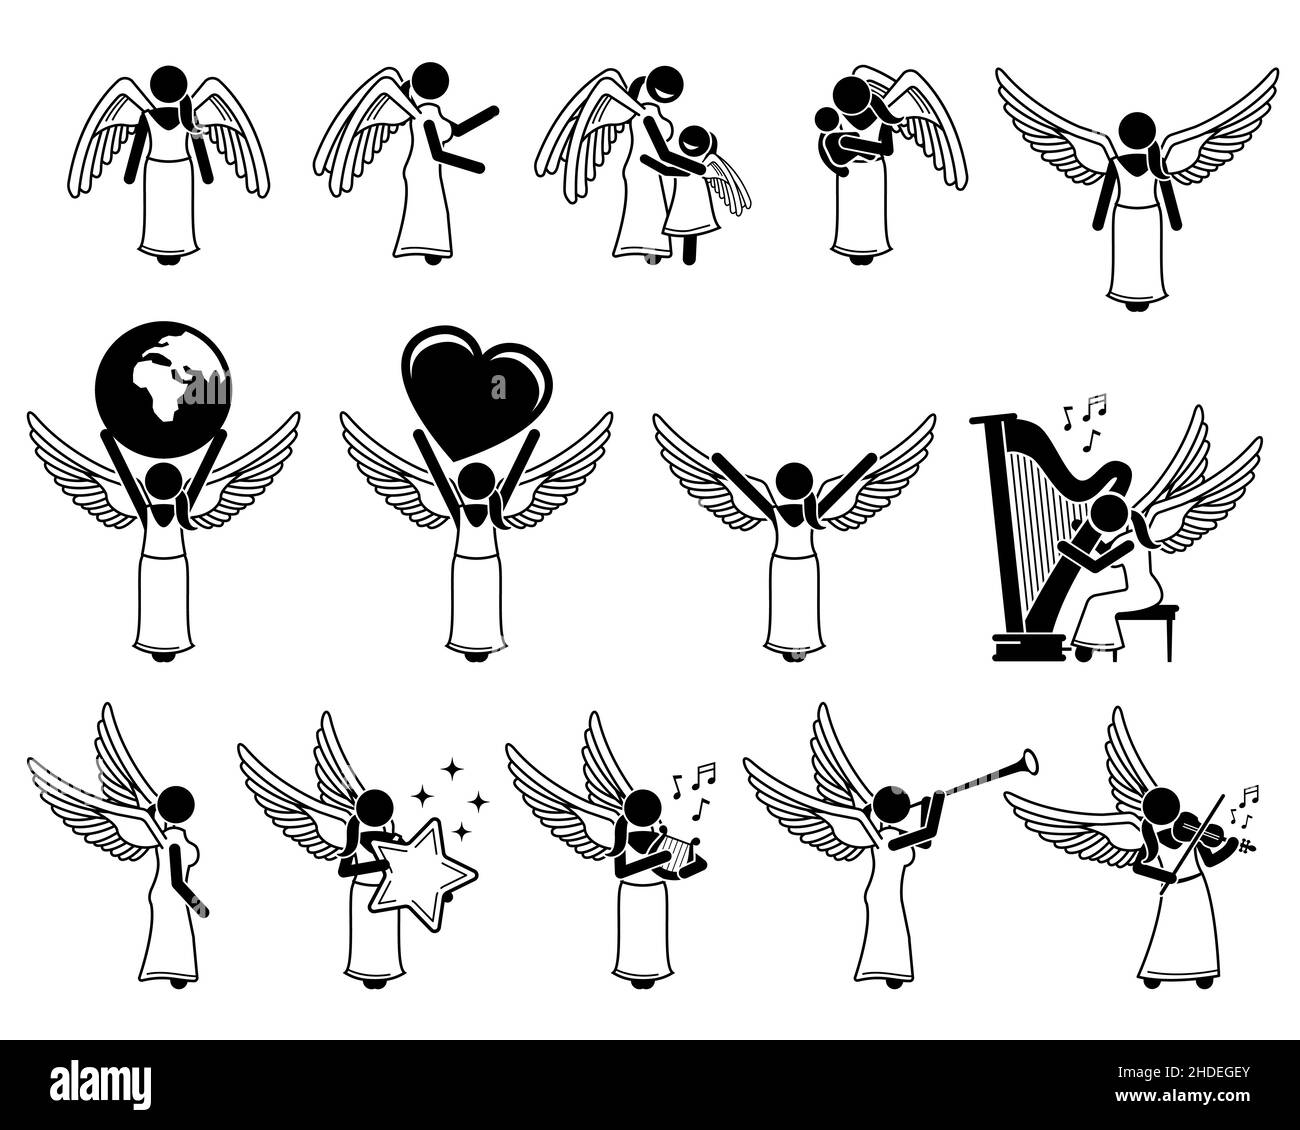 Female God angel stick figure pictogram icons. Vector illustrations depict a female angel with wings character designs, holding a child, Earth, love, Stock Vector